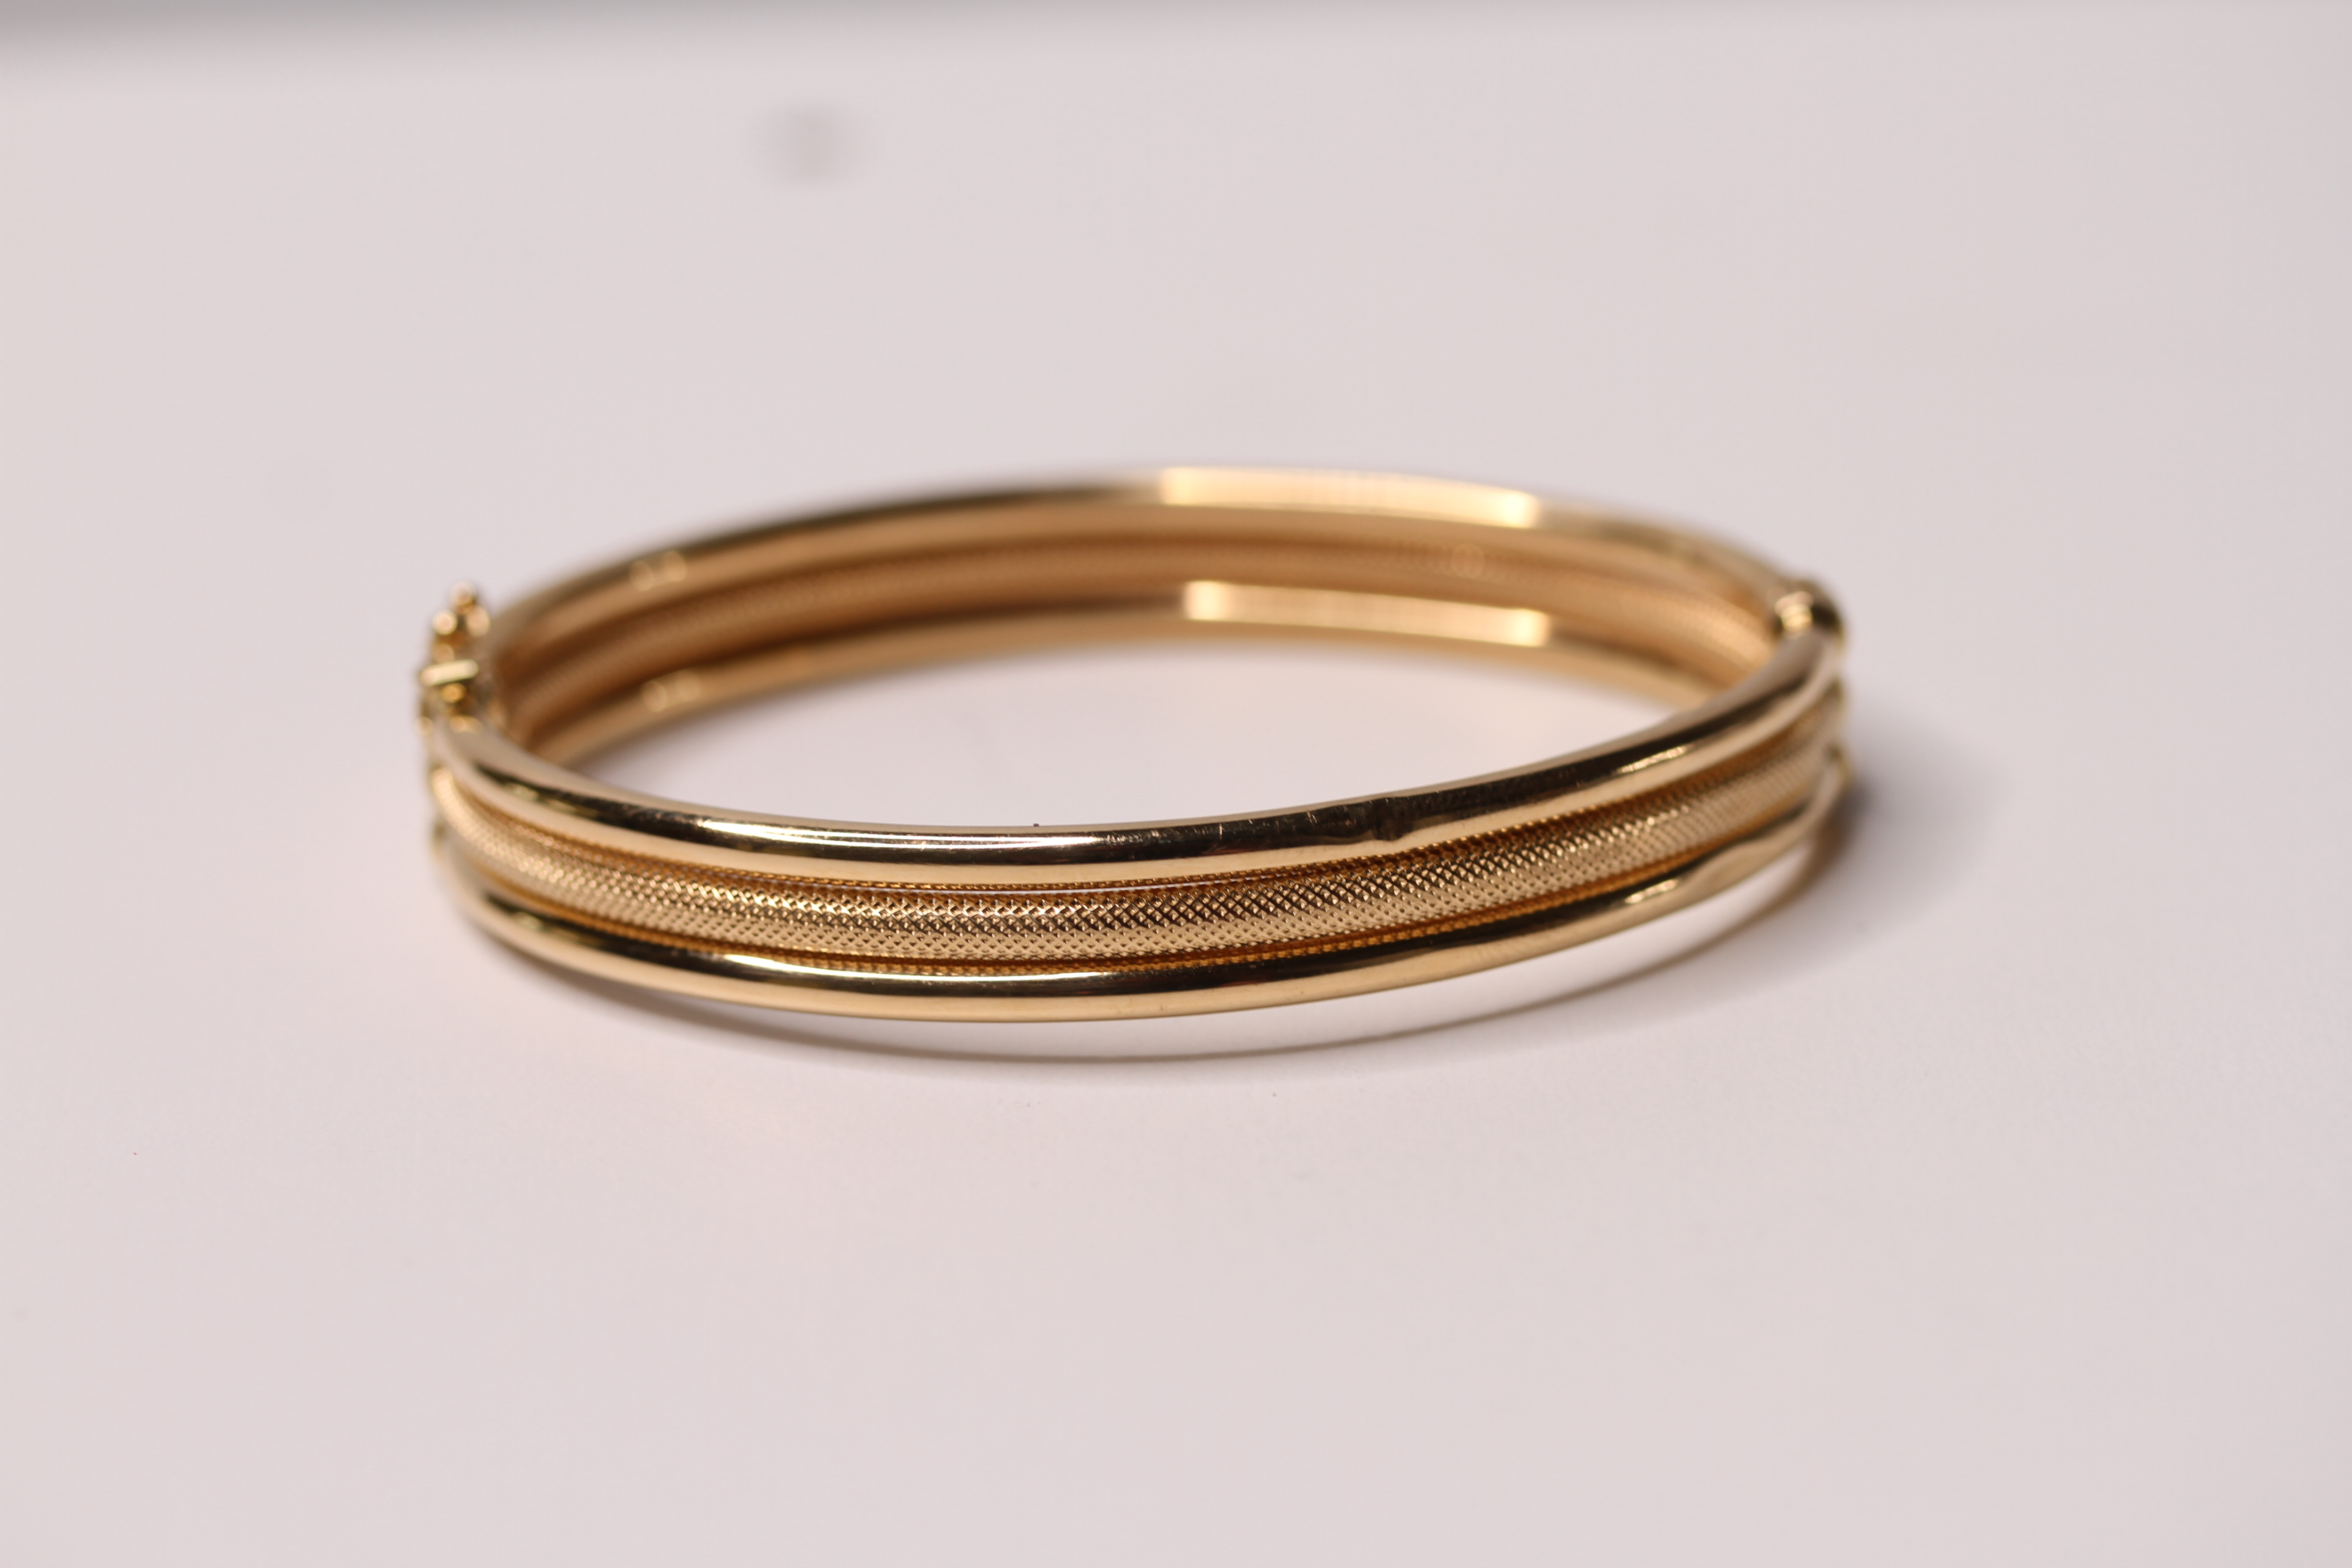 *TO BE SOLD WITHOUT RESERVE*An 18ct gold bangle made up of three bands, one with a textured